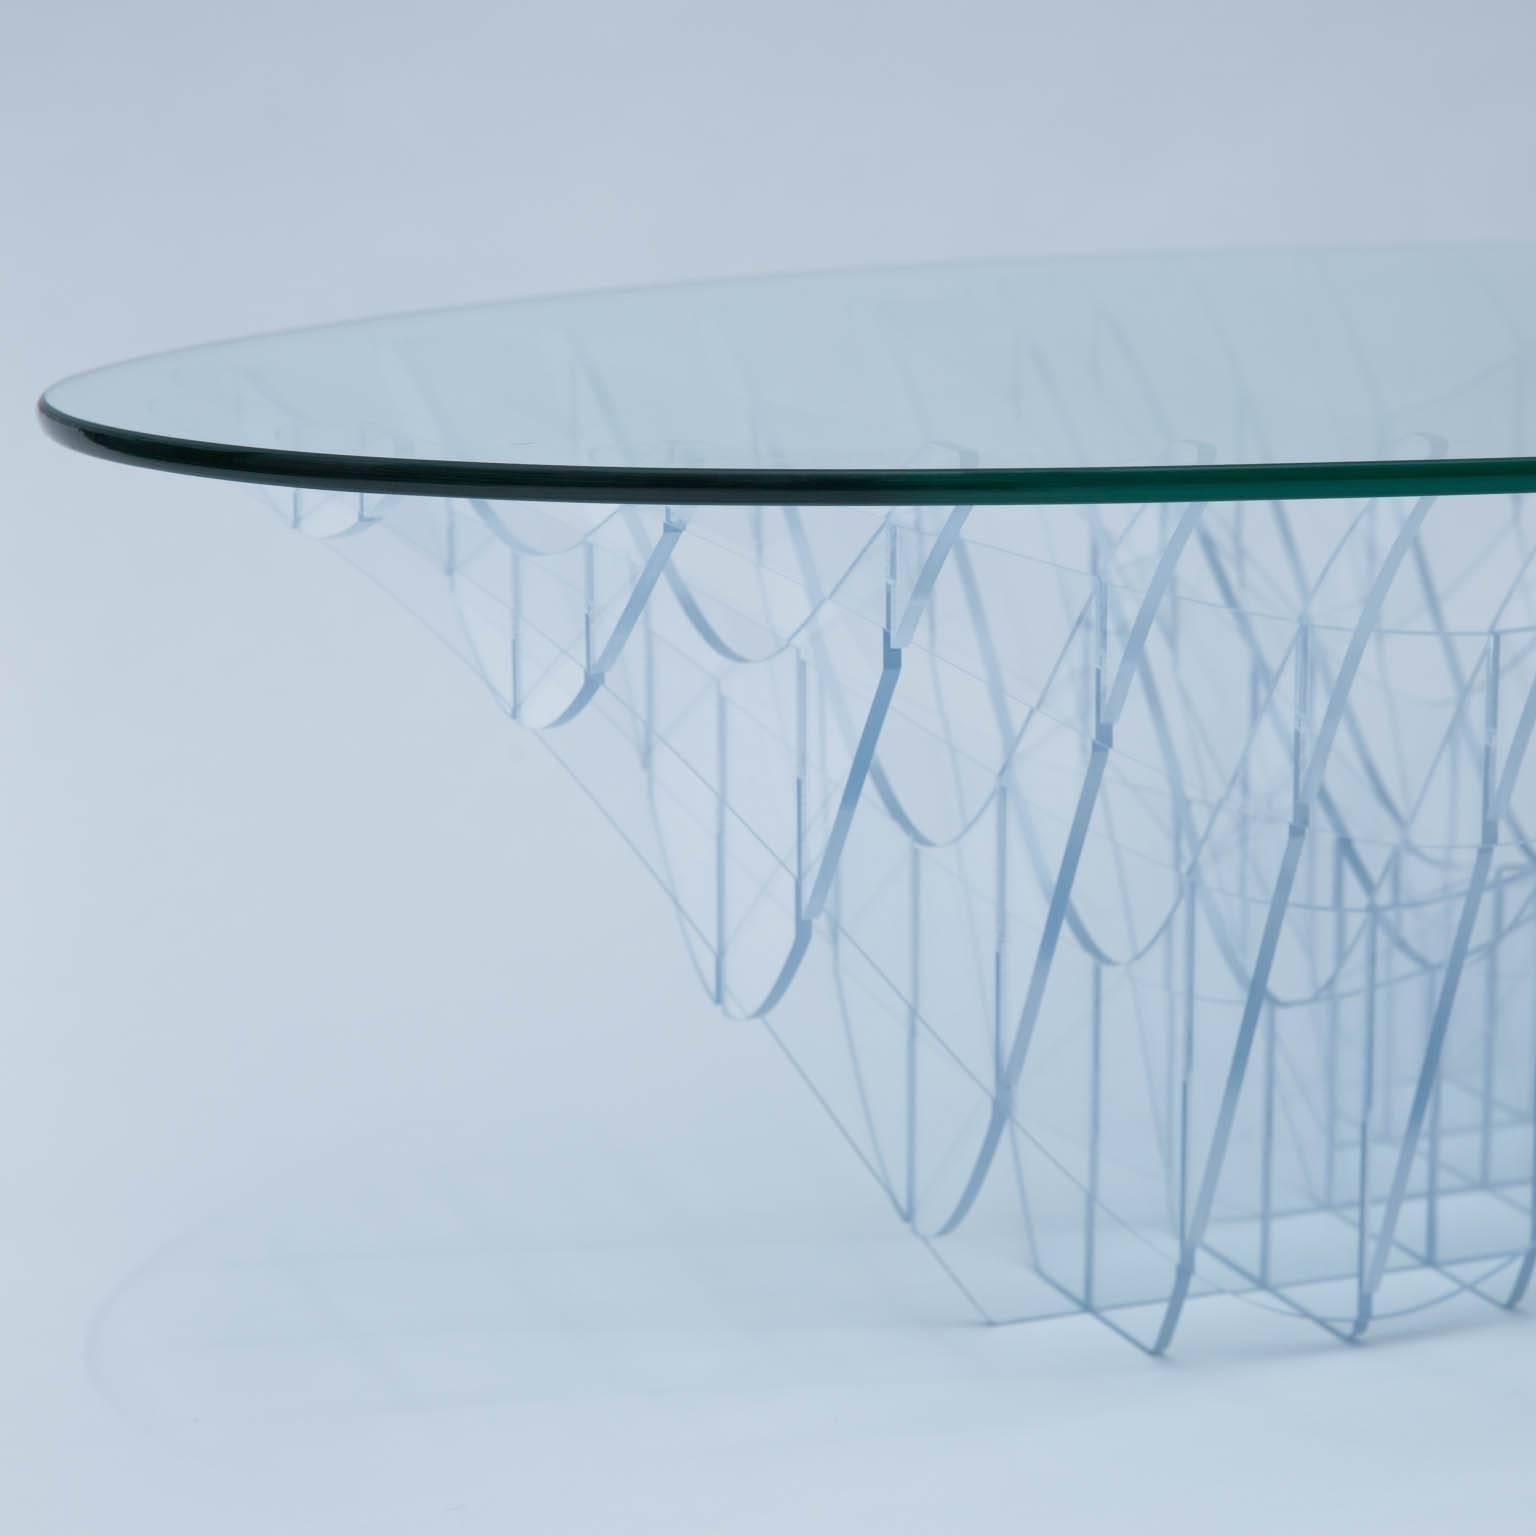 This table uses two simple materials to create an organic, curved and endlessly fascinating work of sculpture. 

It was designed as a prototype to explore the viability of more furniture like it. It is the first one and is signed by the artist.